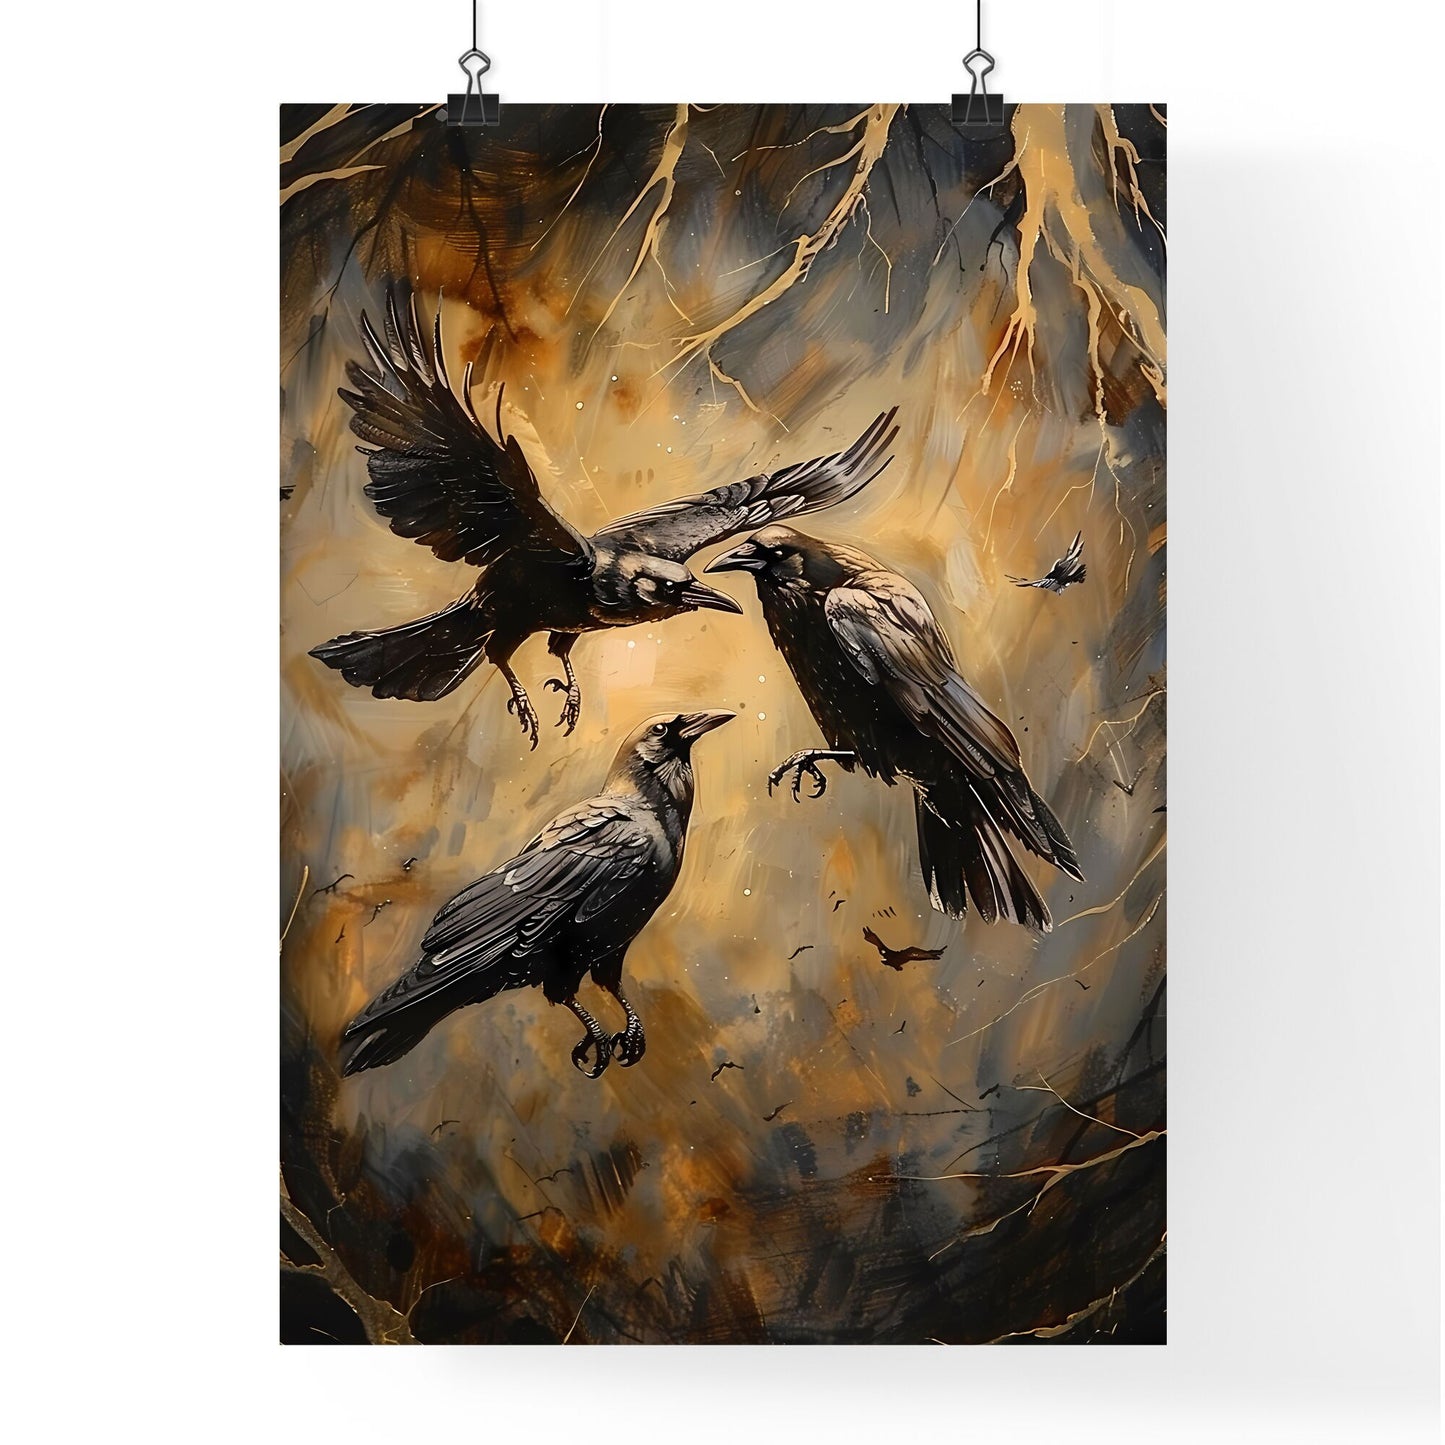 Artful Depiction of Birds in Flight: Vibrant Painting of Crows Battling Mid-Air Default Title